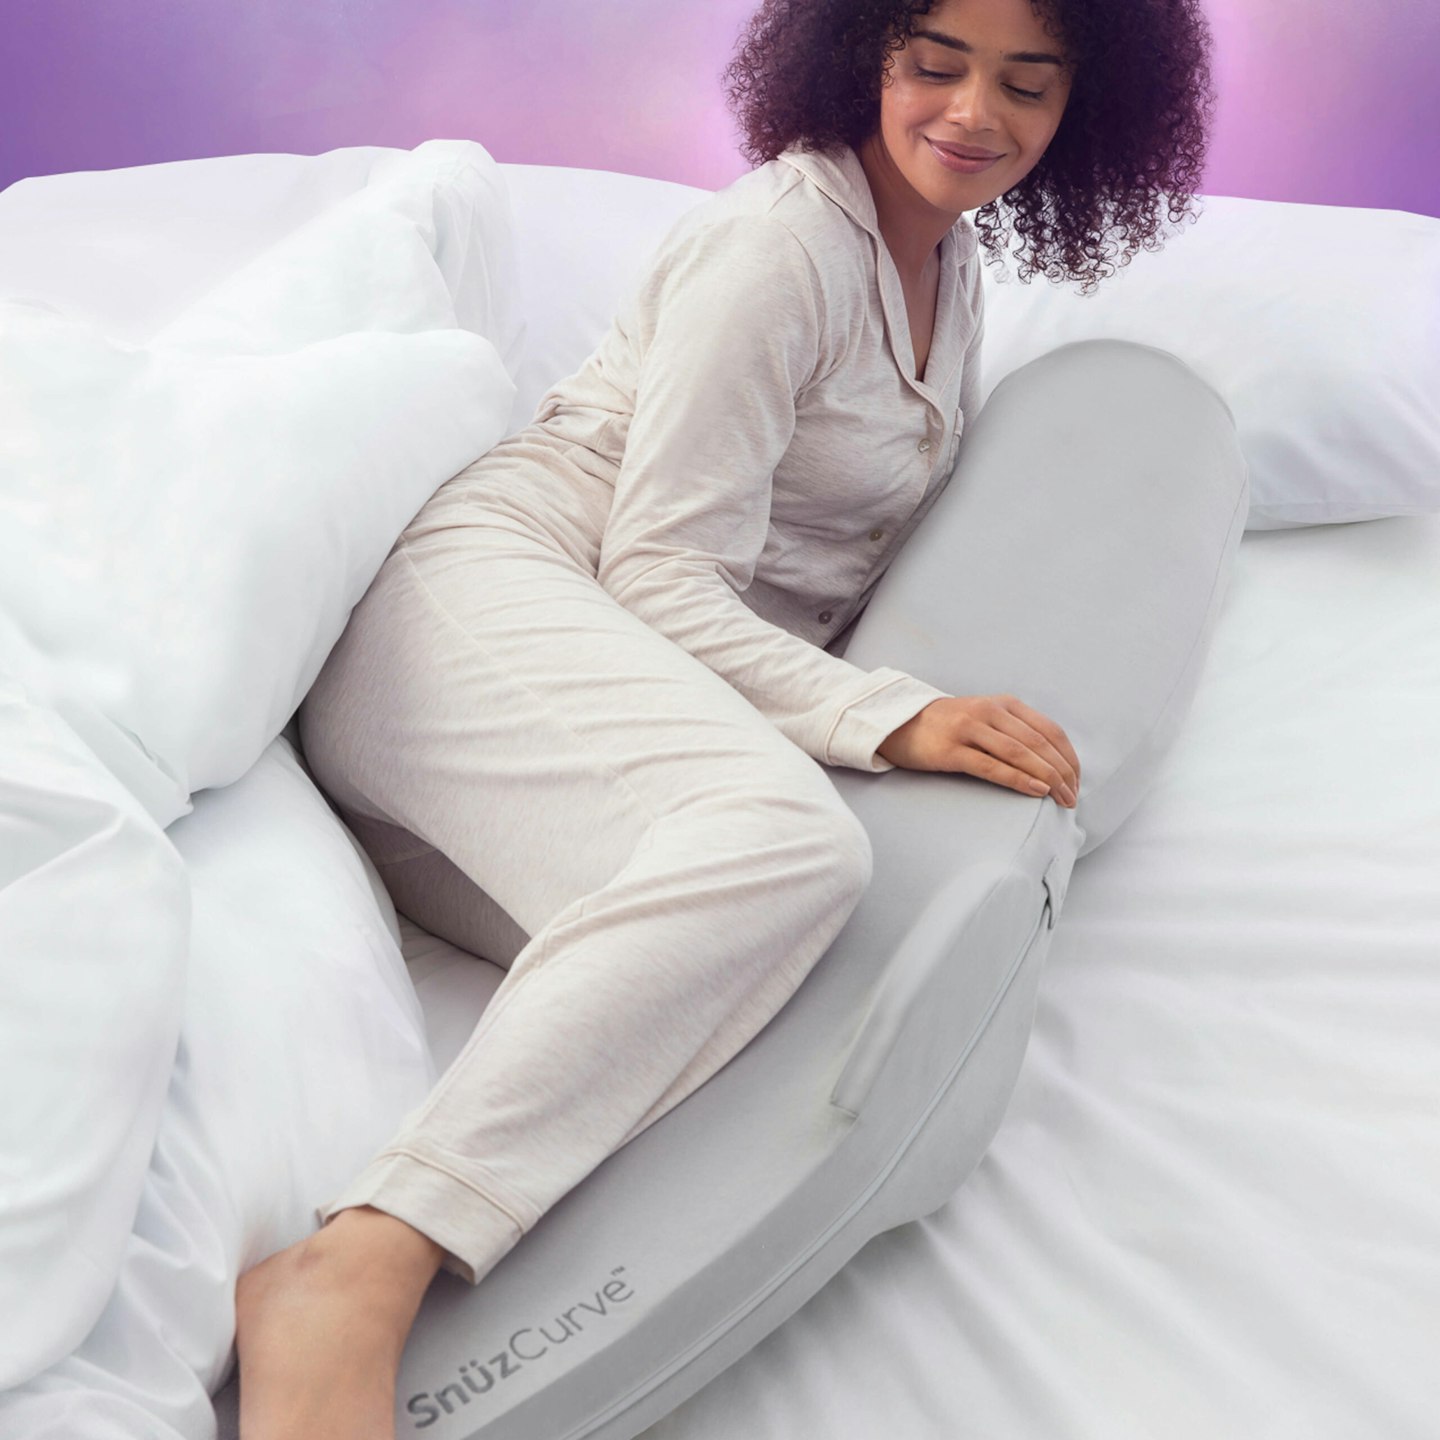 The 9 best pregnancy pillows of 2023, with expert tips